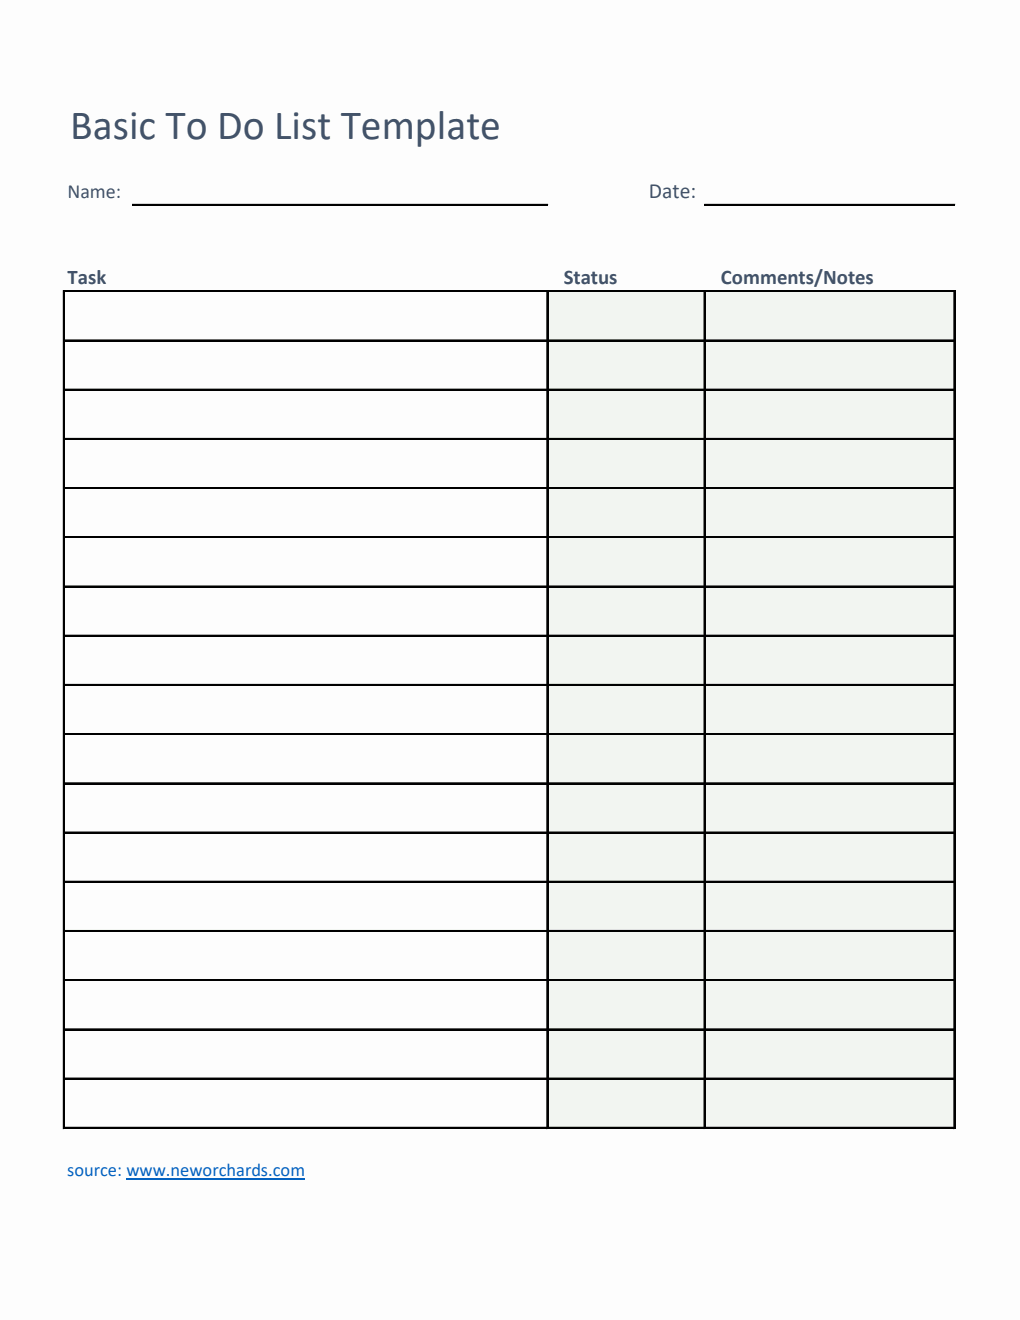 To Do List Template Excel (Basic)